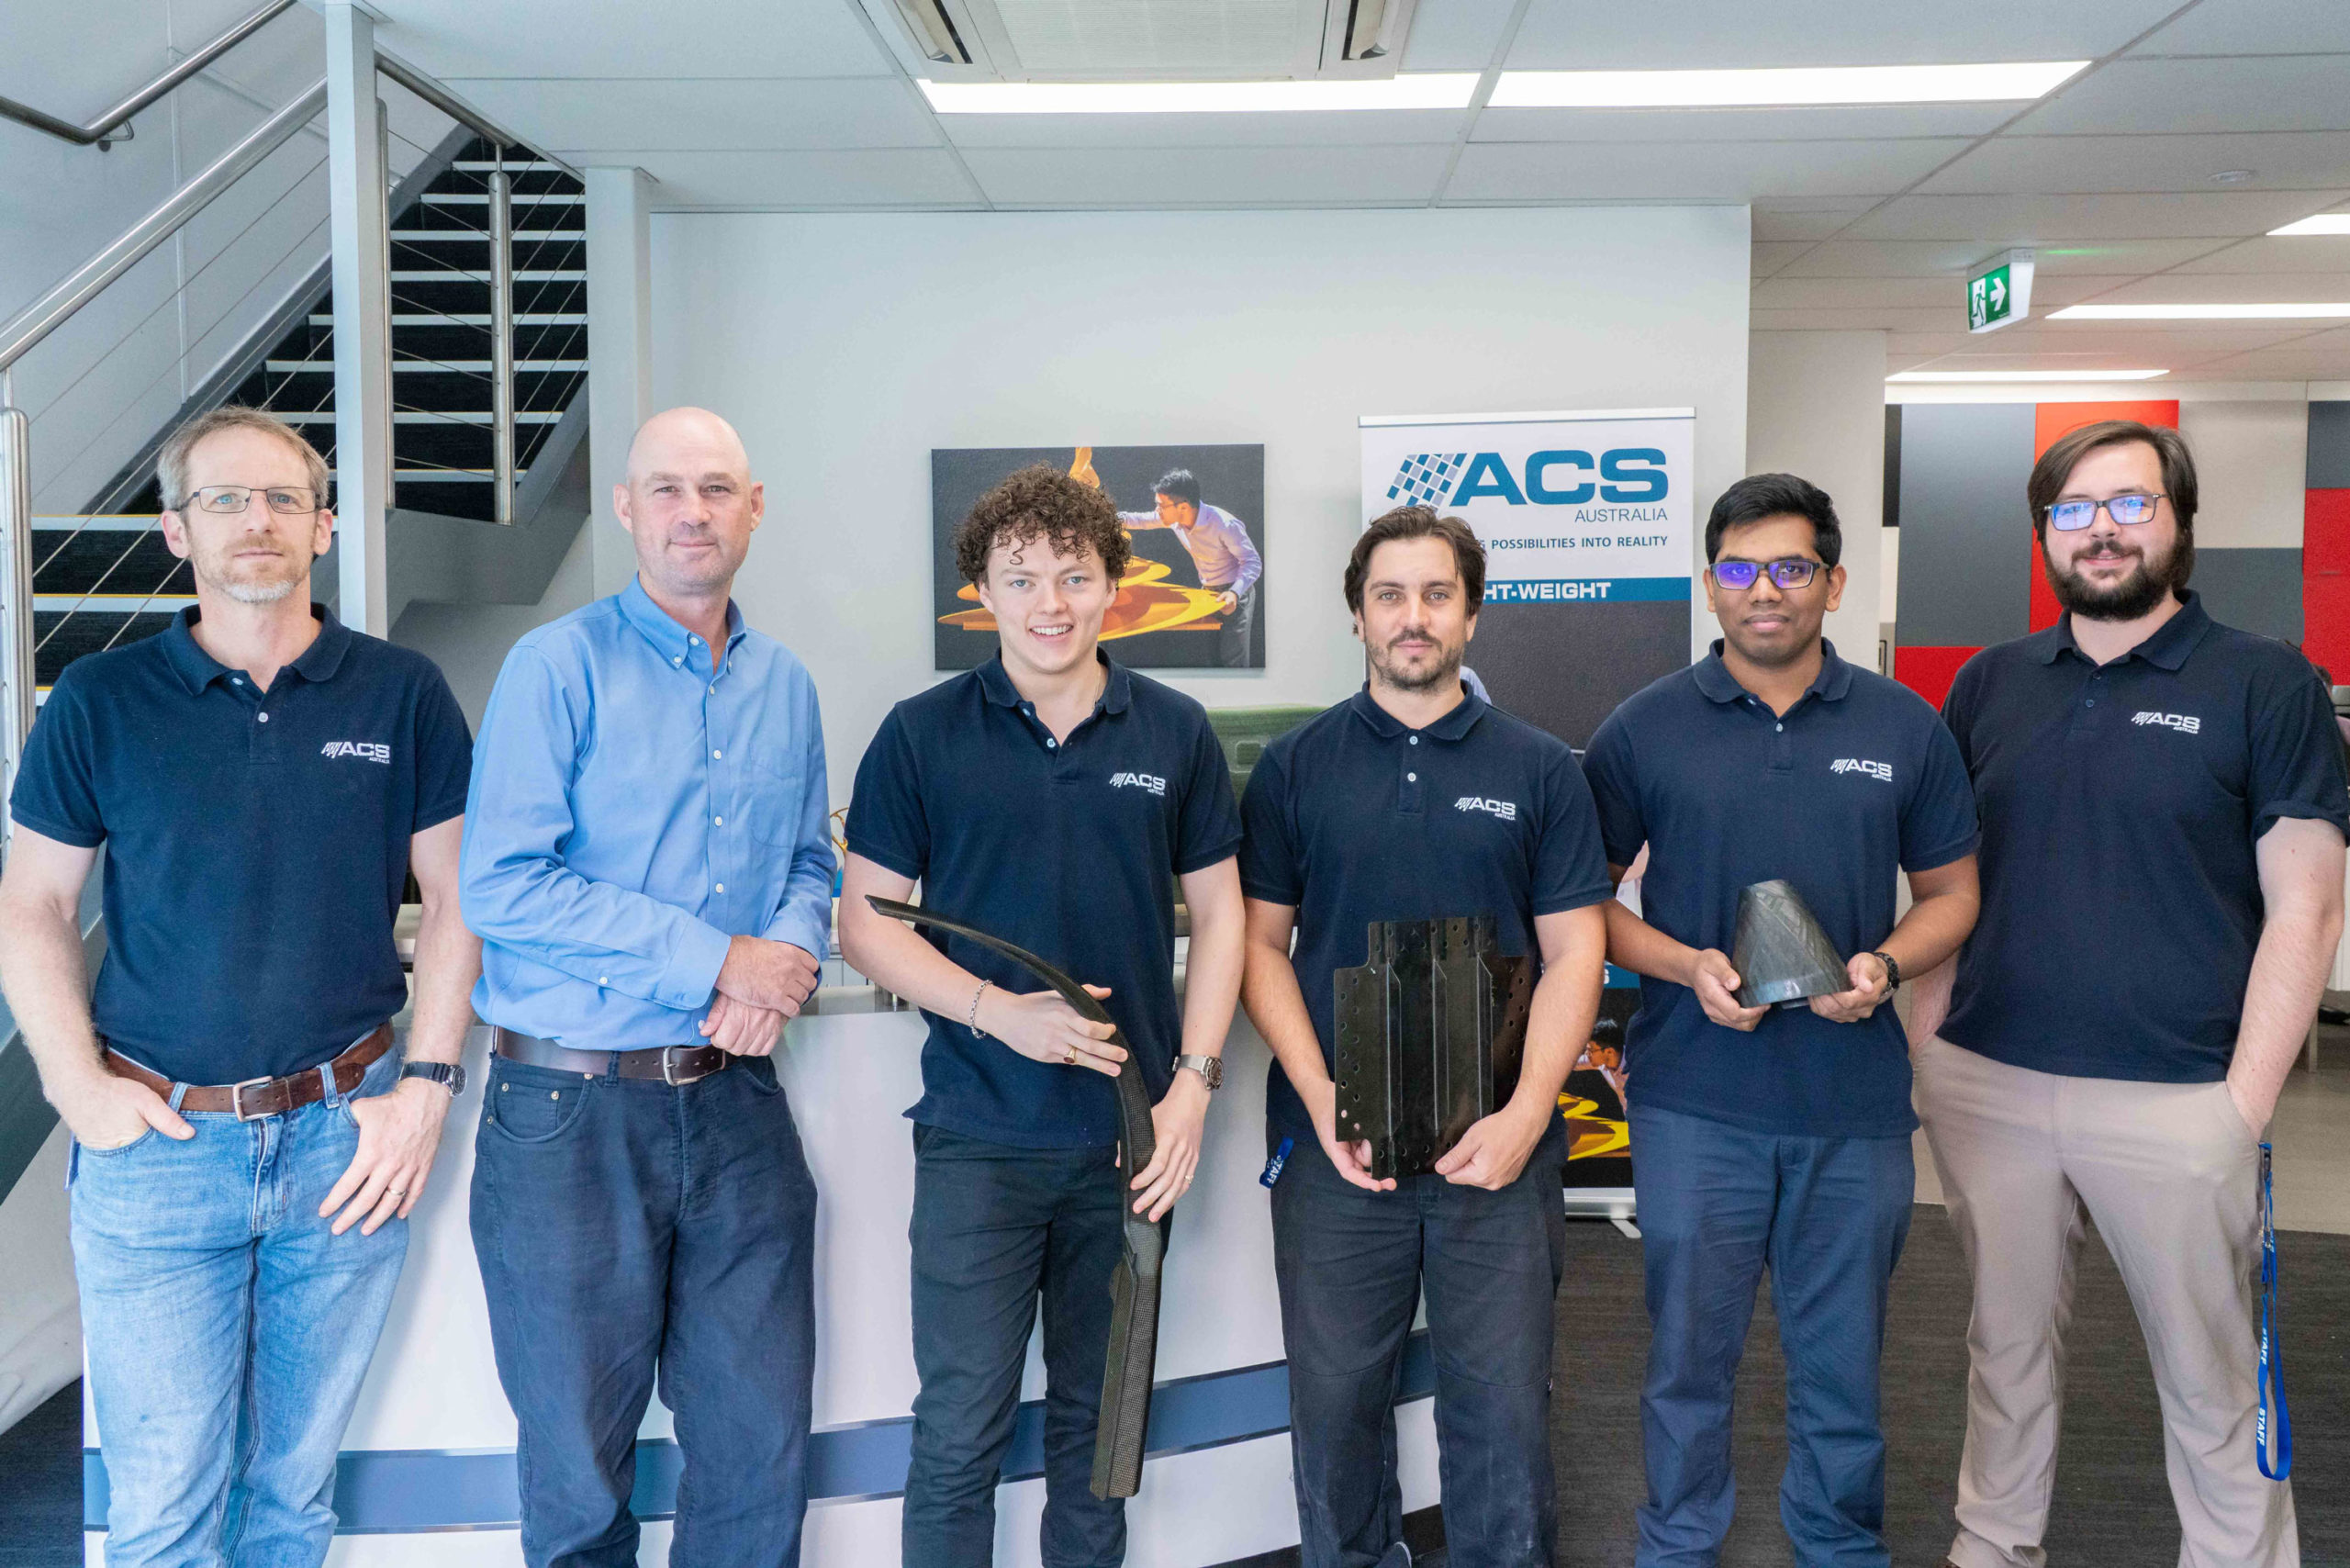 (L-R) Group photo of Defence Industry Internship Program (DIIP) Interns and managers Johannes Straub, Mat Stoessiger, Kai Farrer, Nic Rayner, Shevaan Leitan and George Frake III at Advanced Composite Structures Australia (ACS-A)